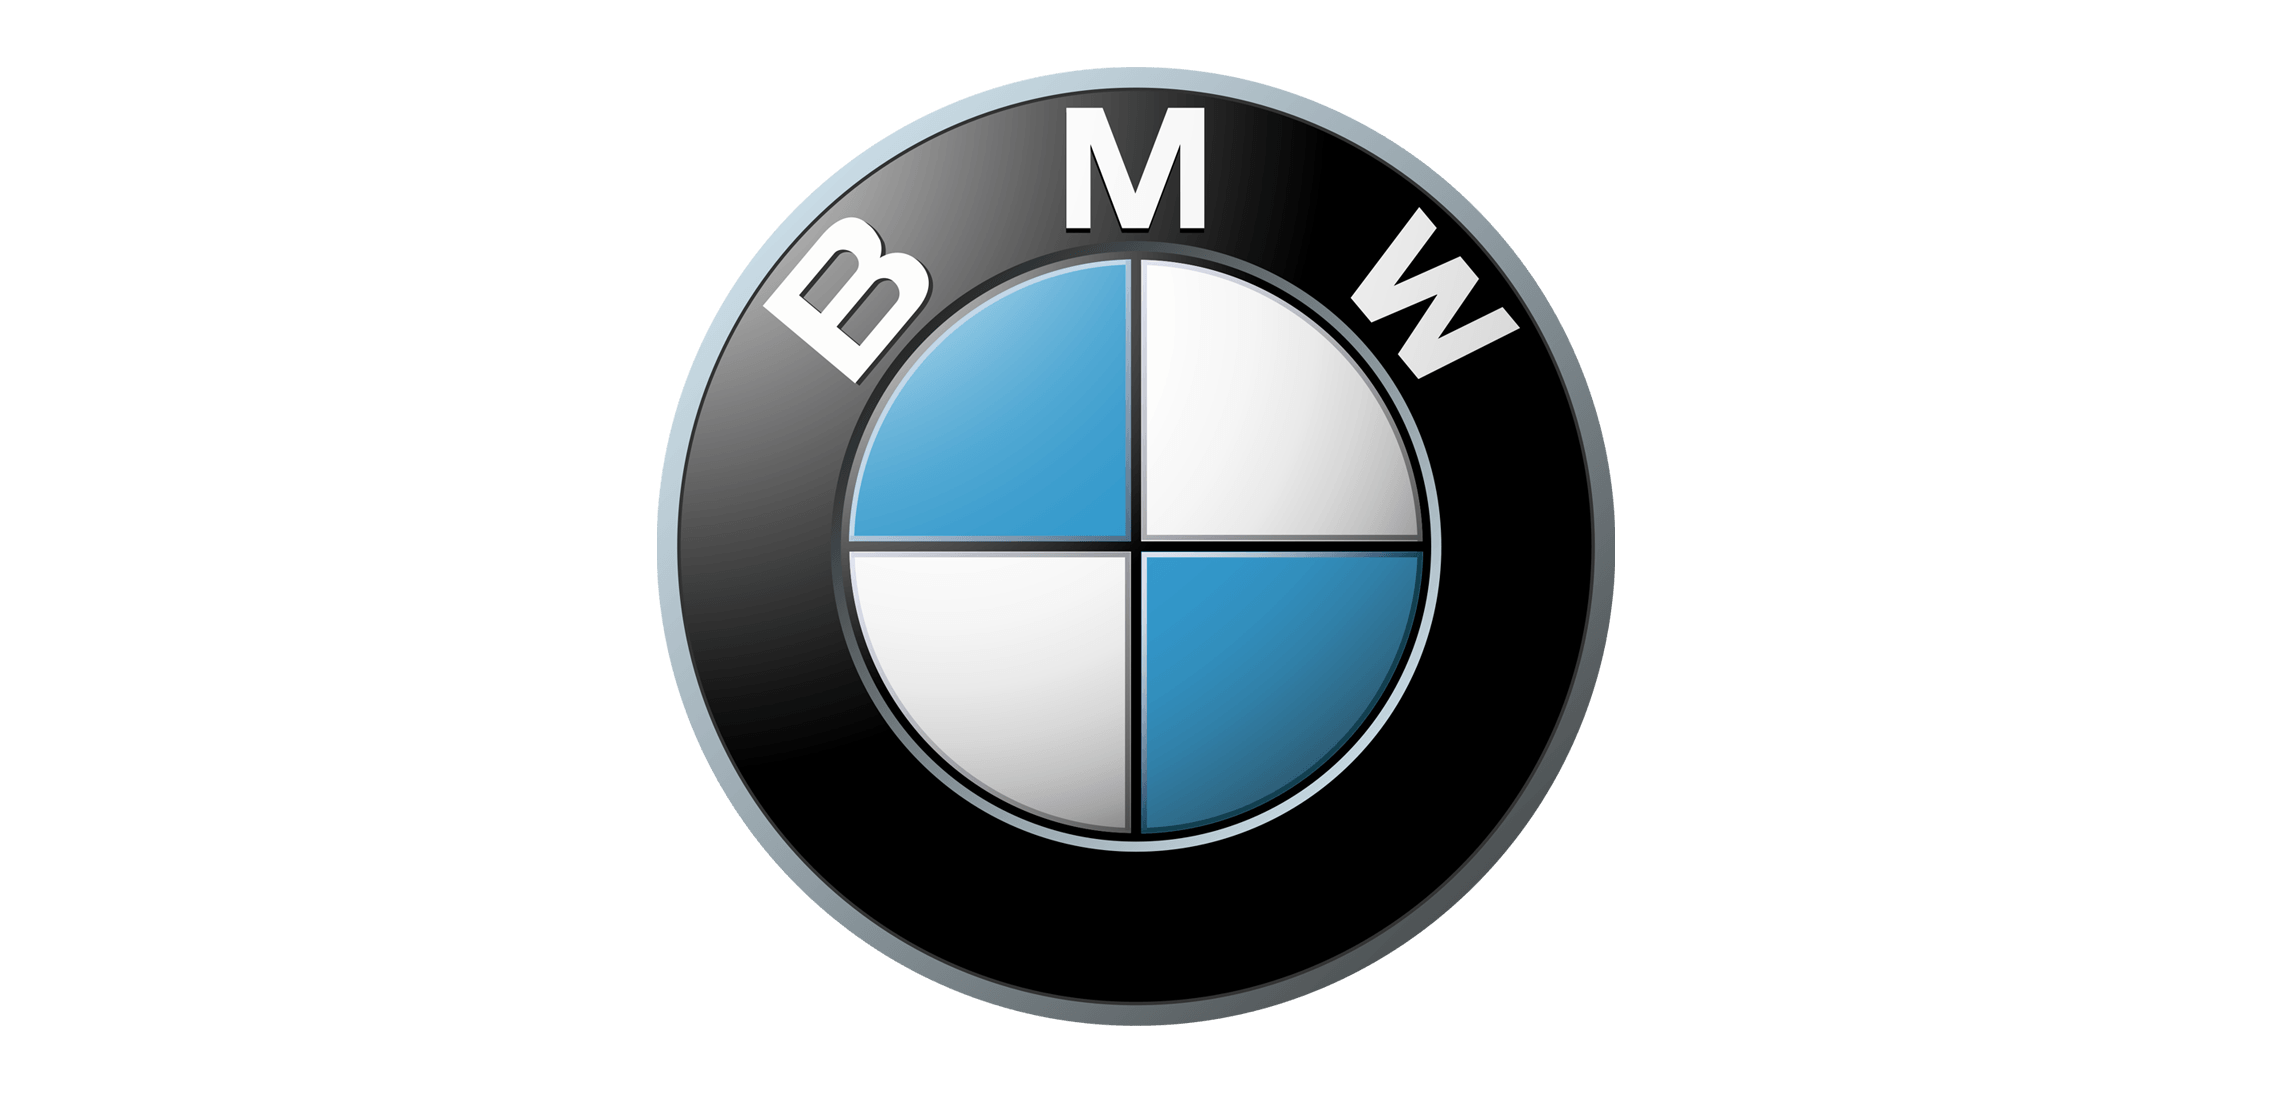 Subsidiary of BMW Logo - BMW Logo Meaning and History. Symbol BMW | World Cars Brands